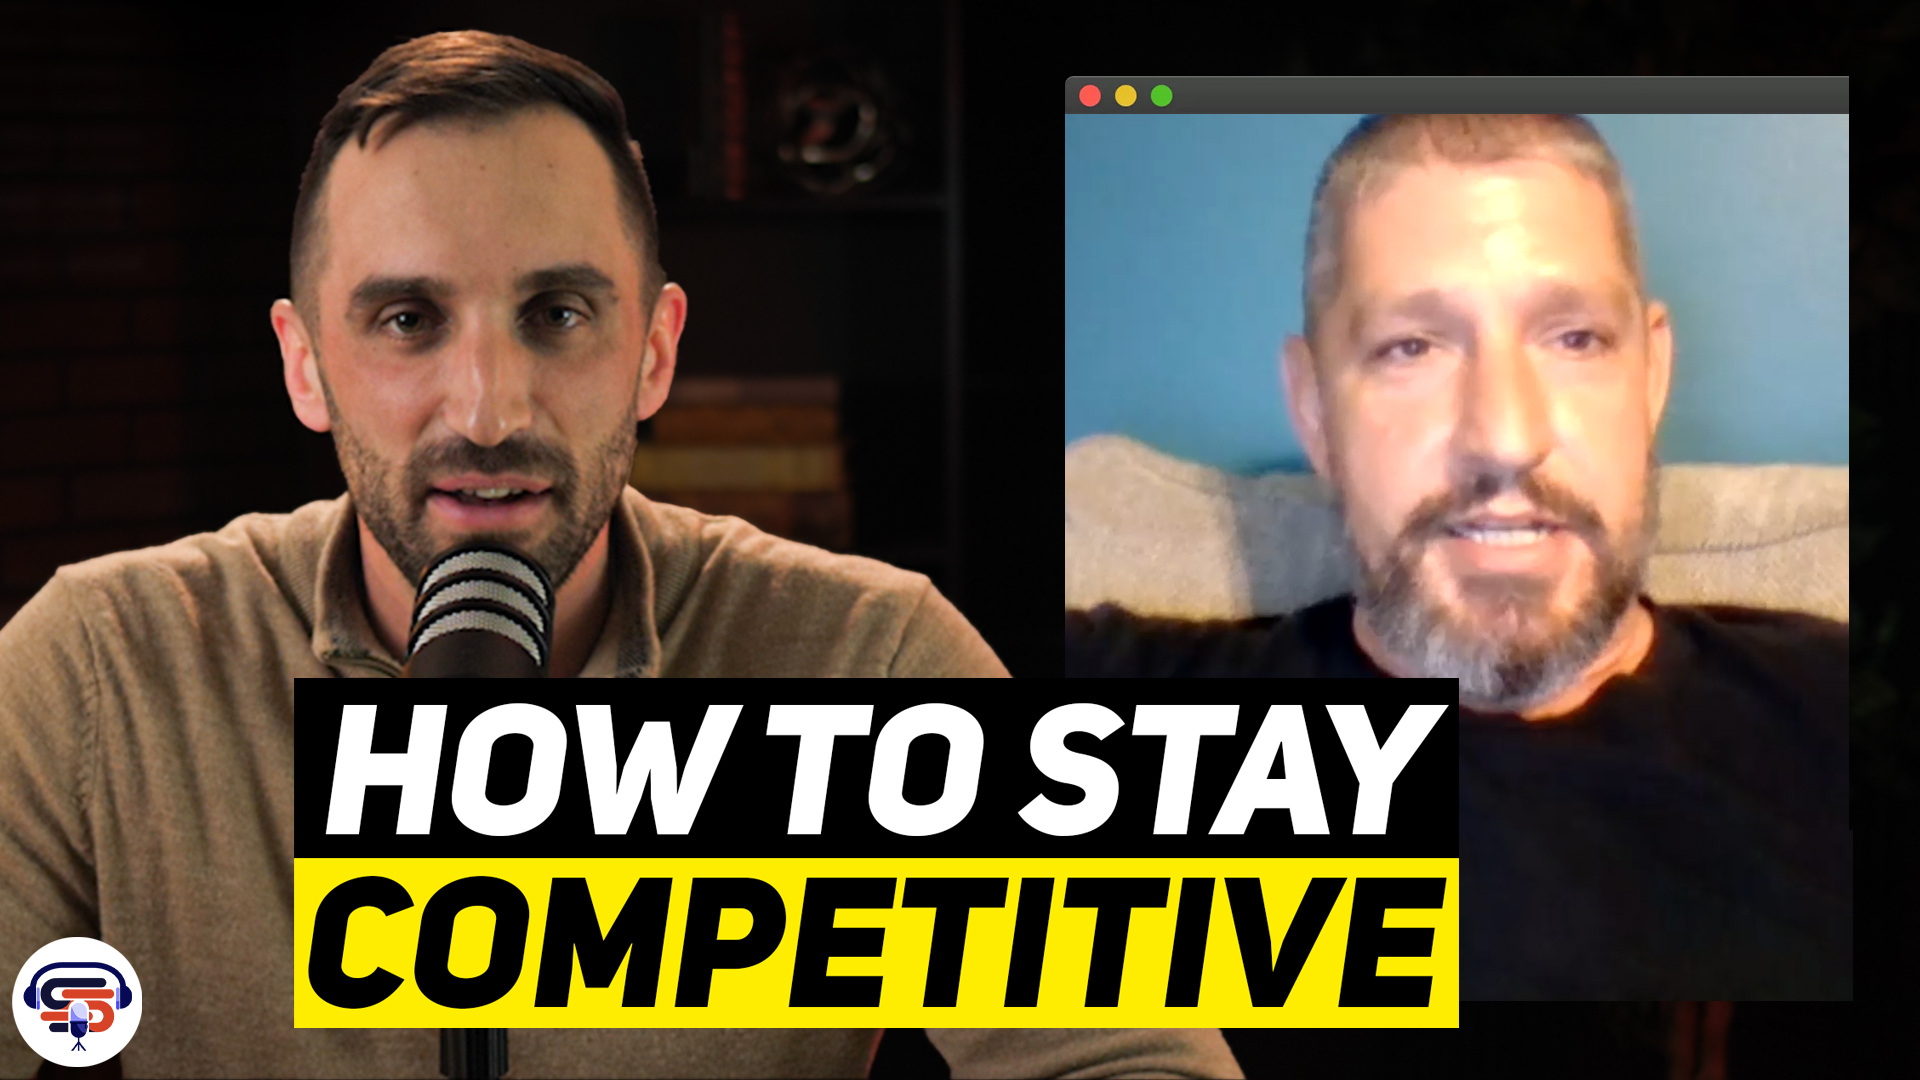 7 Tips to Stay Competitive: Insights from a Self-Storage Manager